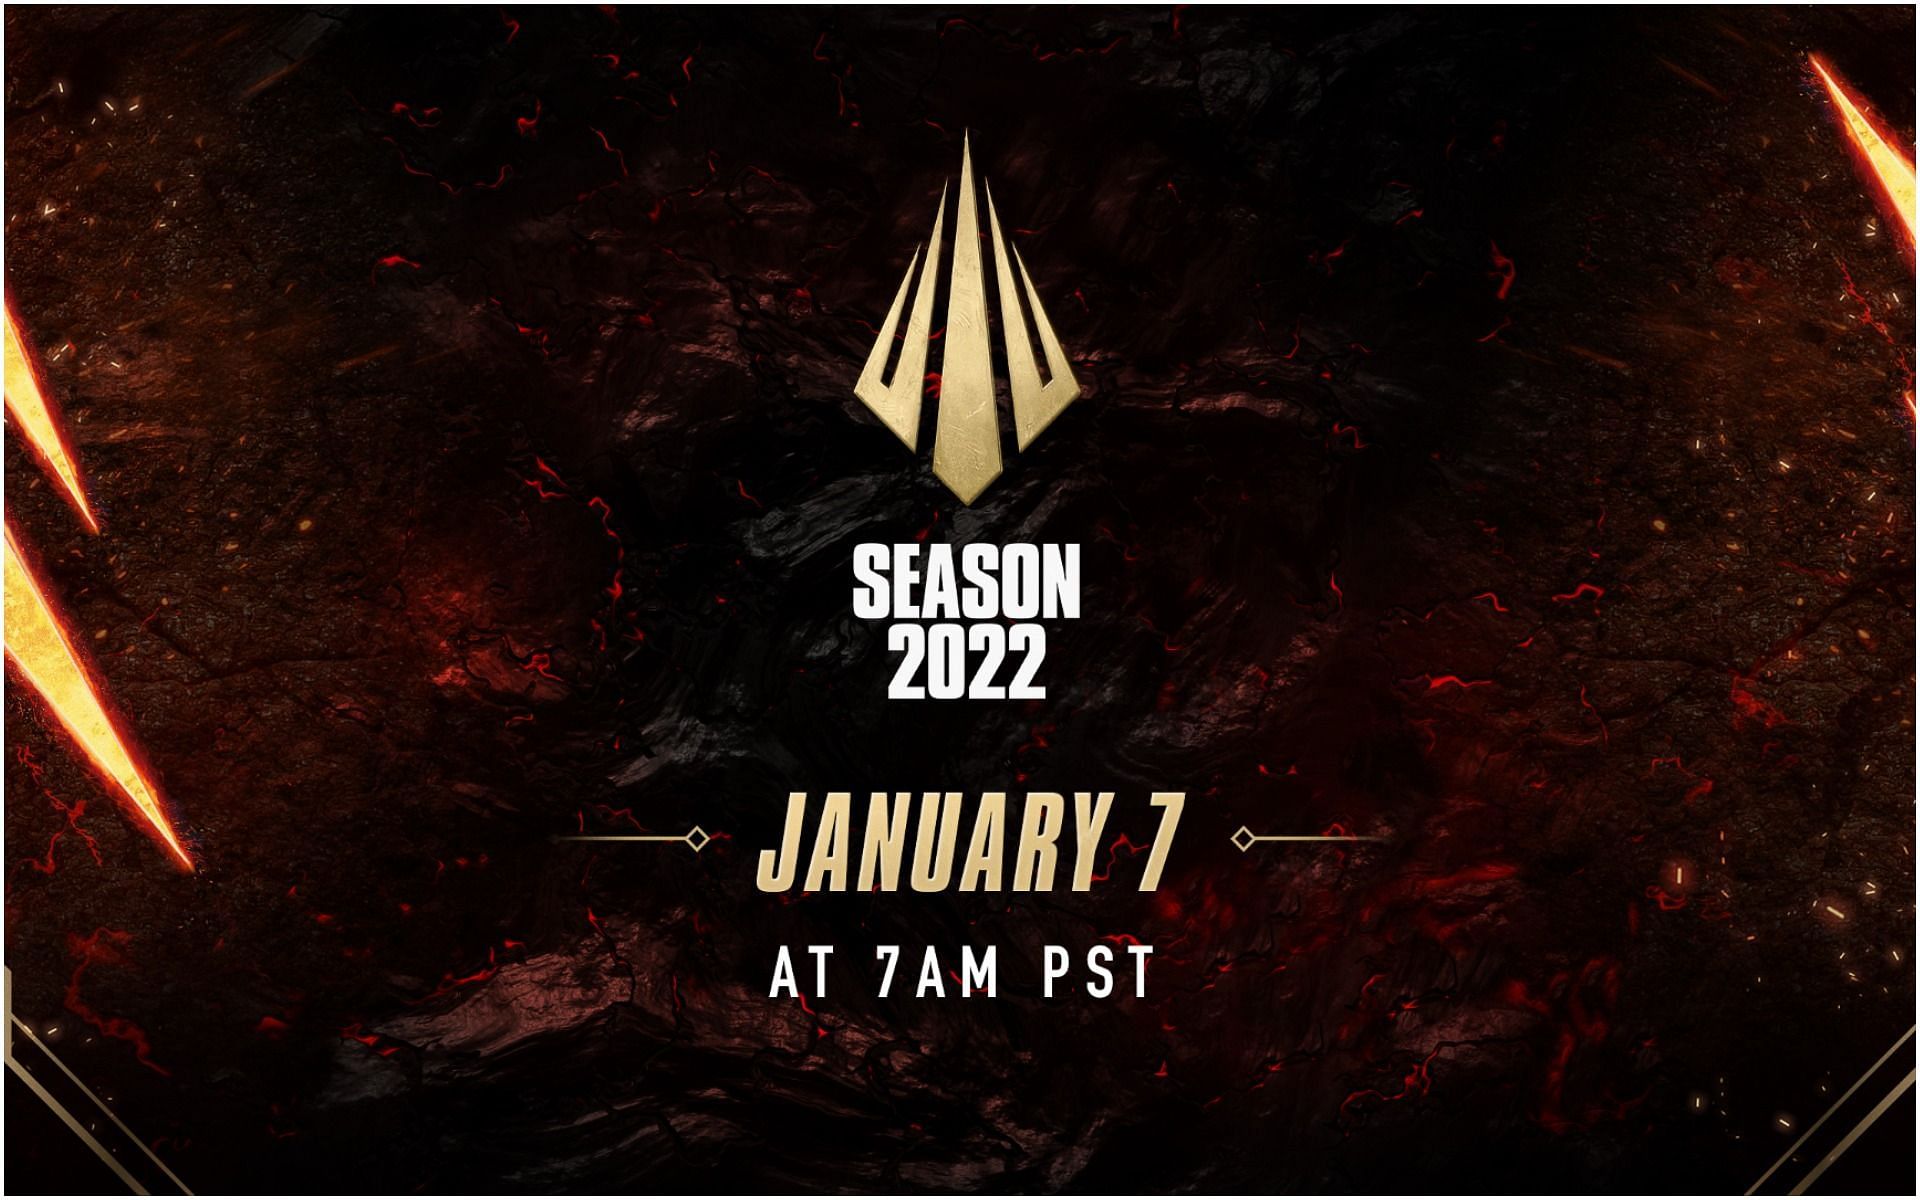 All expected information that will be revealed during the premiere of League of Legends&#039; 2022 season livestream (Image via League of Legends)